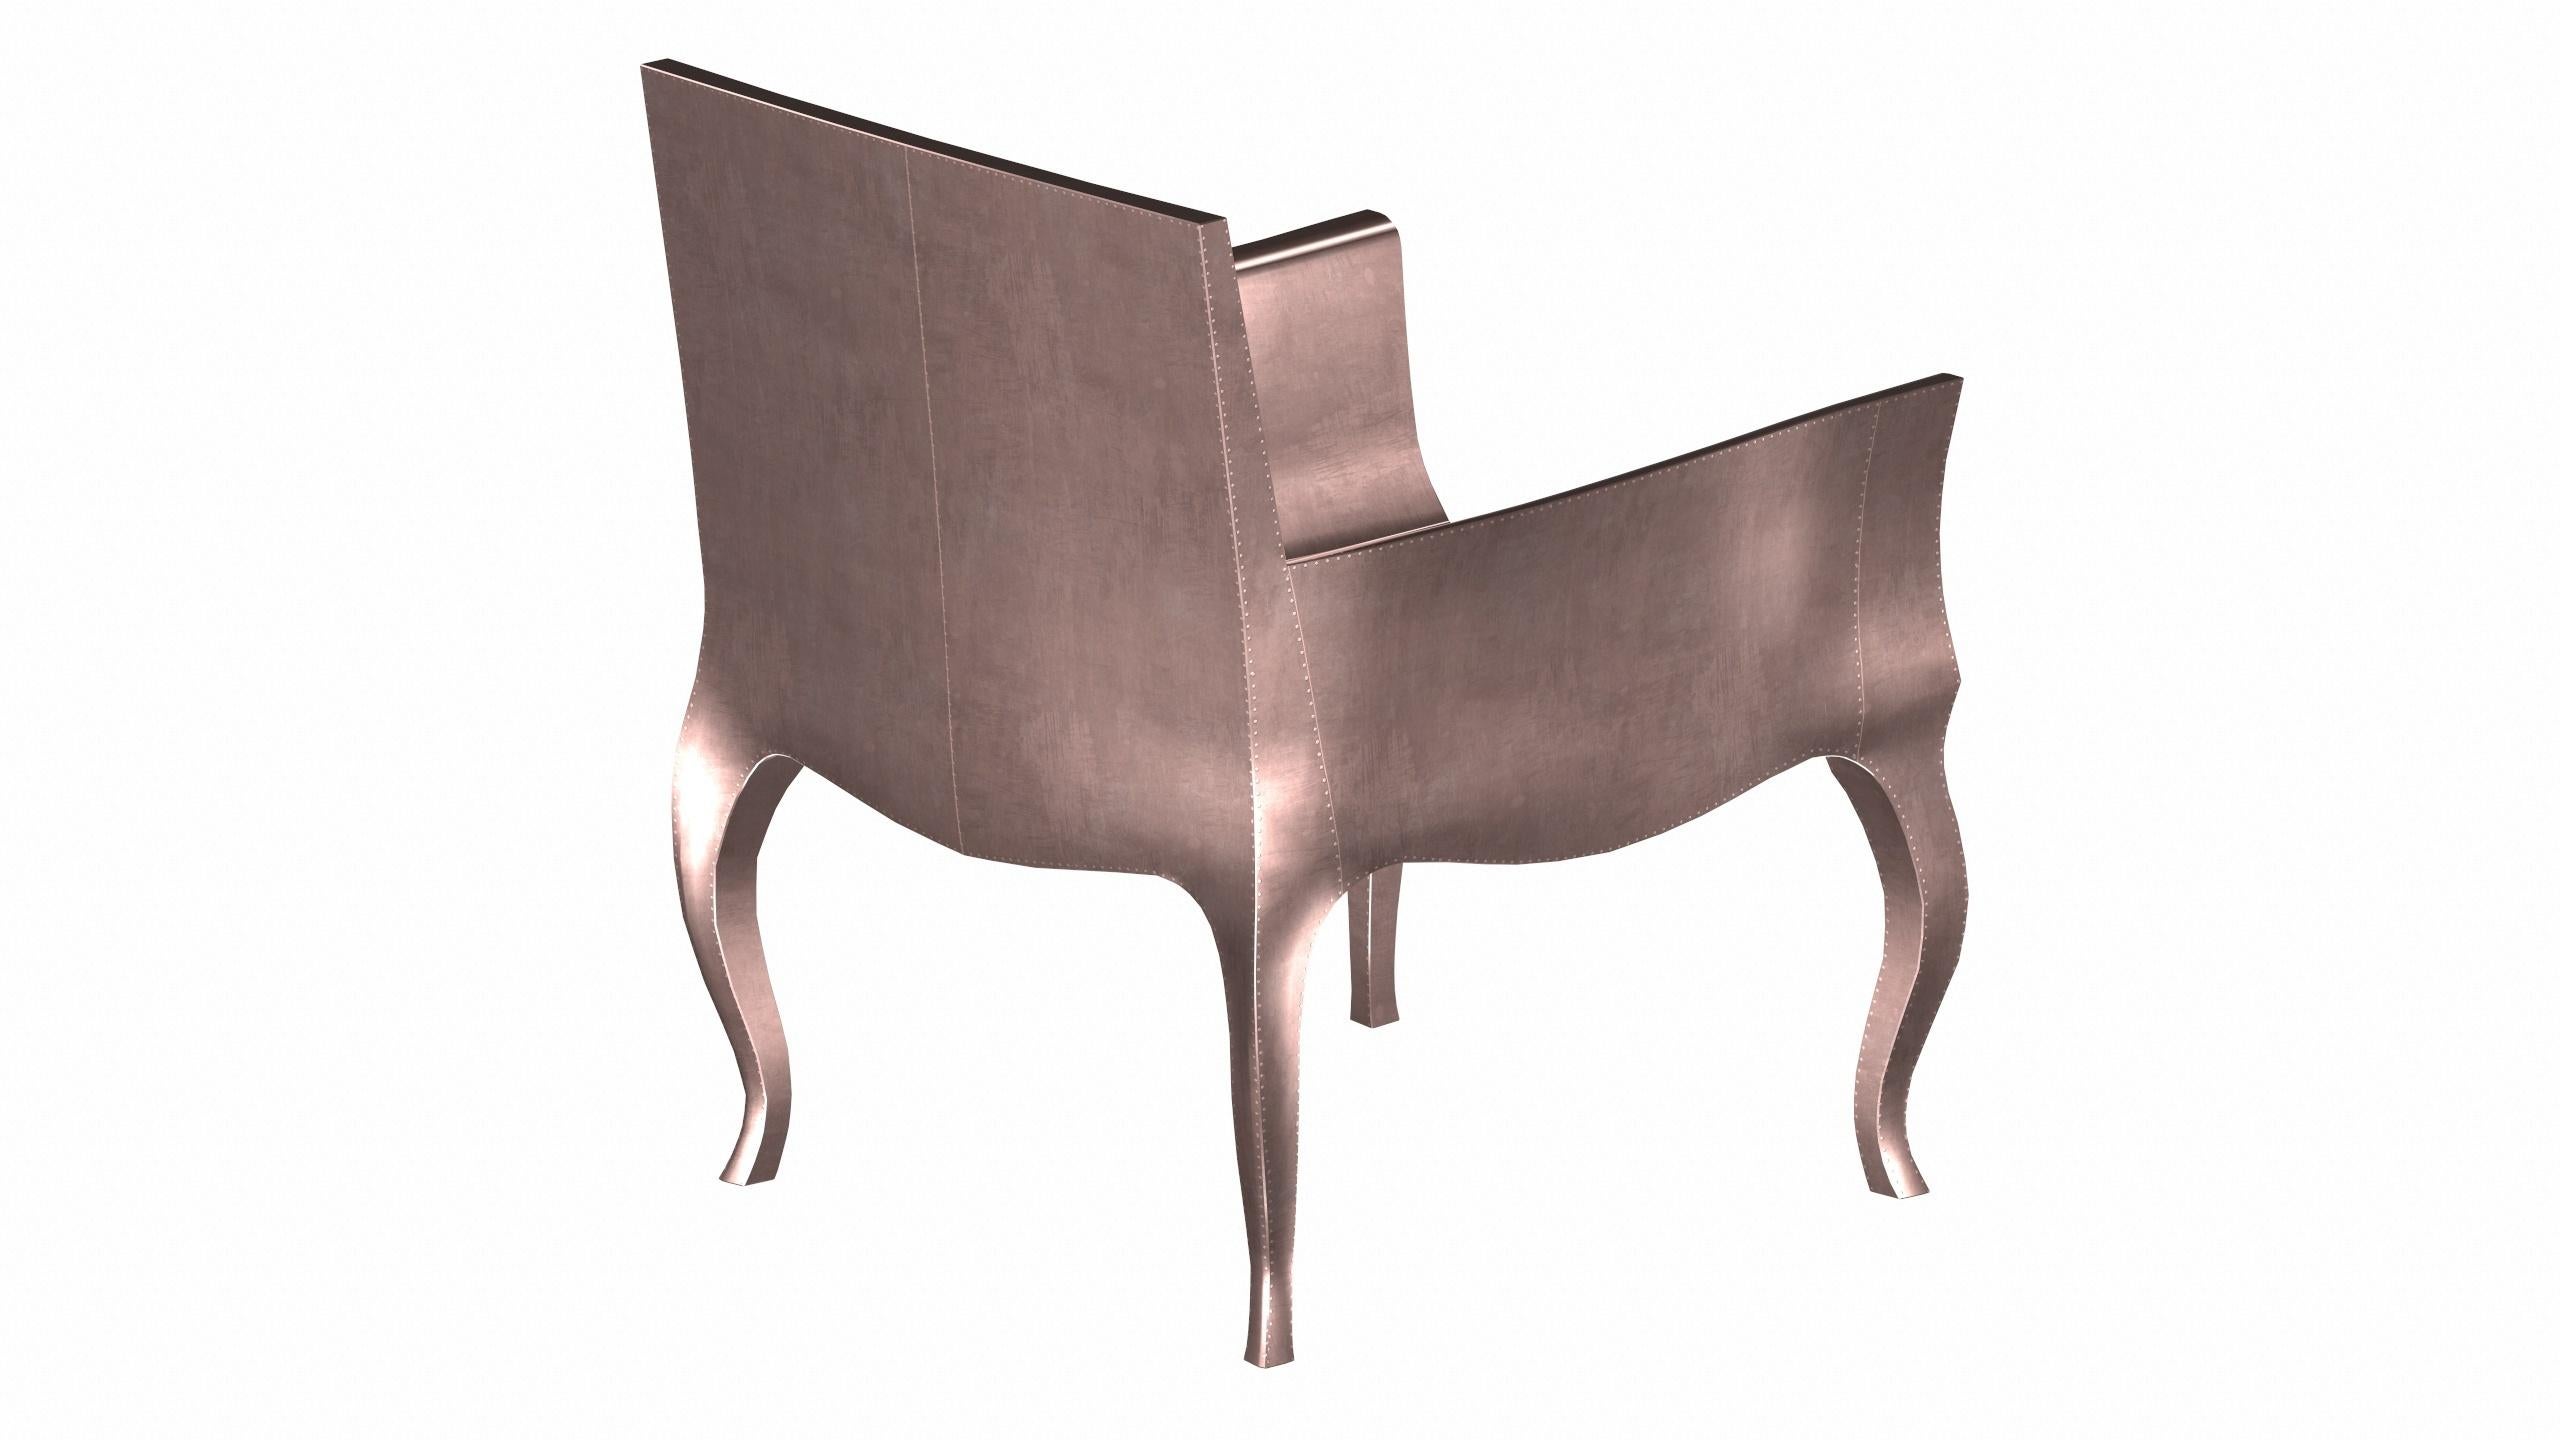 Other Art Deco Office Chair in Smooth Copper by Paul Mathieu for S. Odegard For Sale